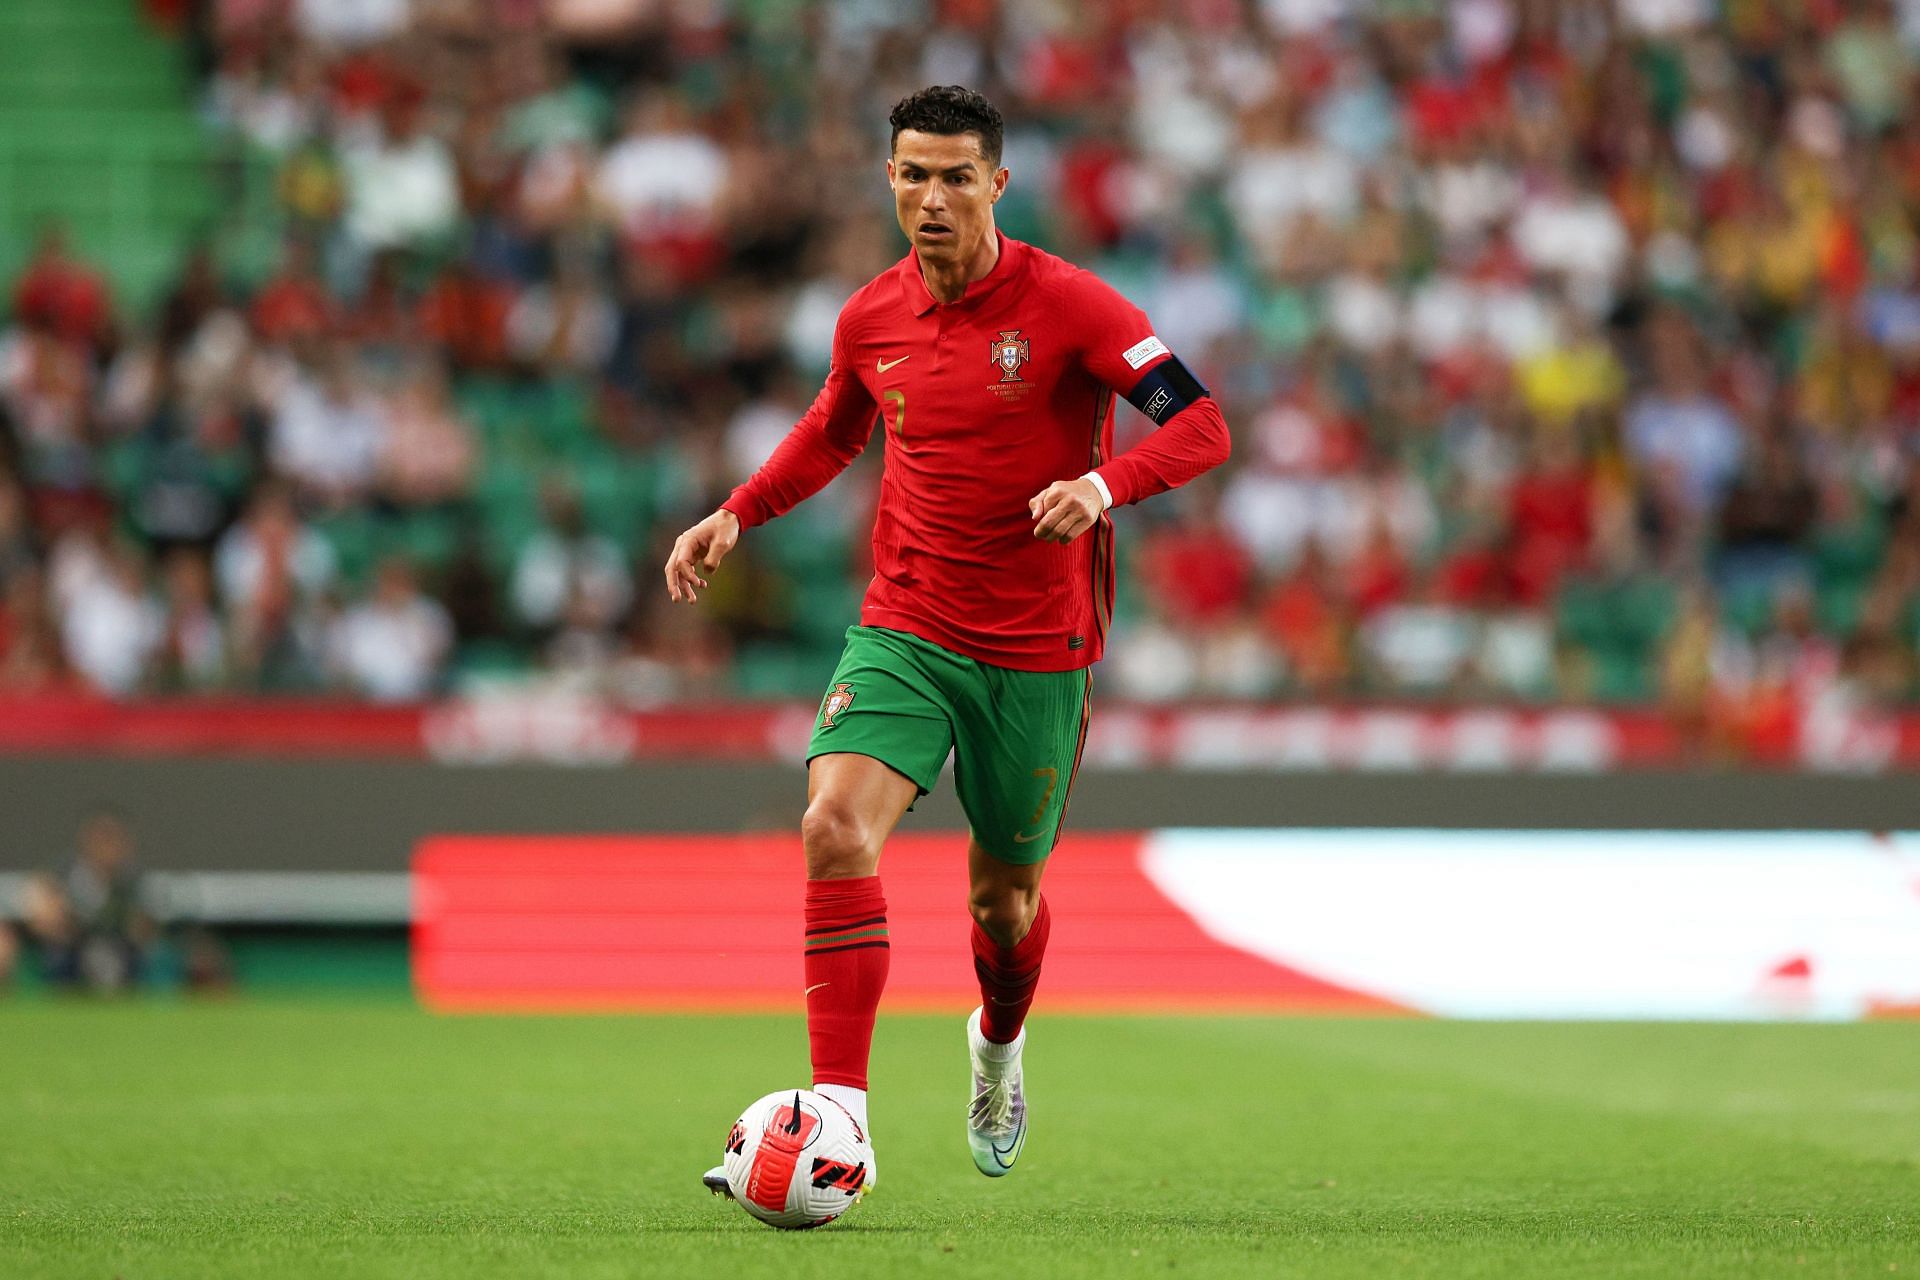 Cristiano Ronaldo is expected to move this summer.